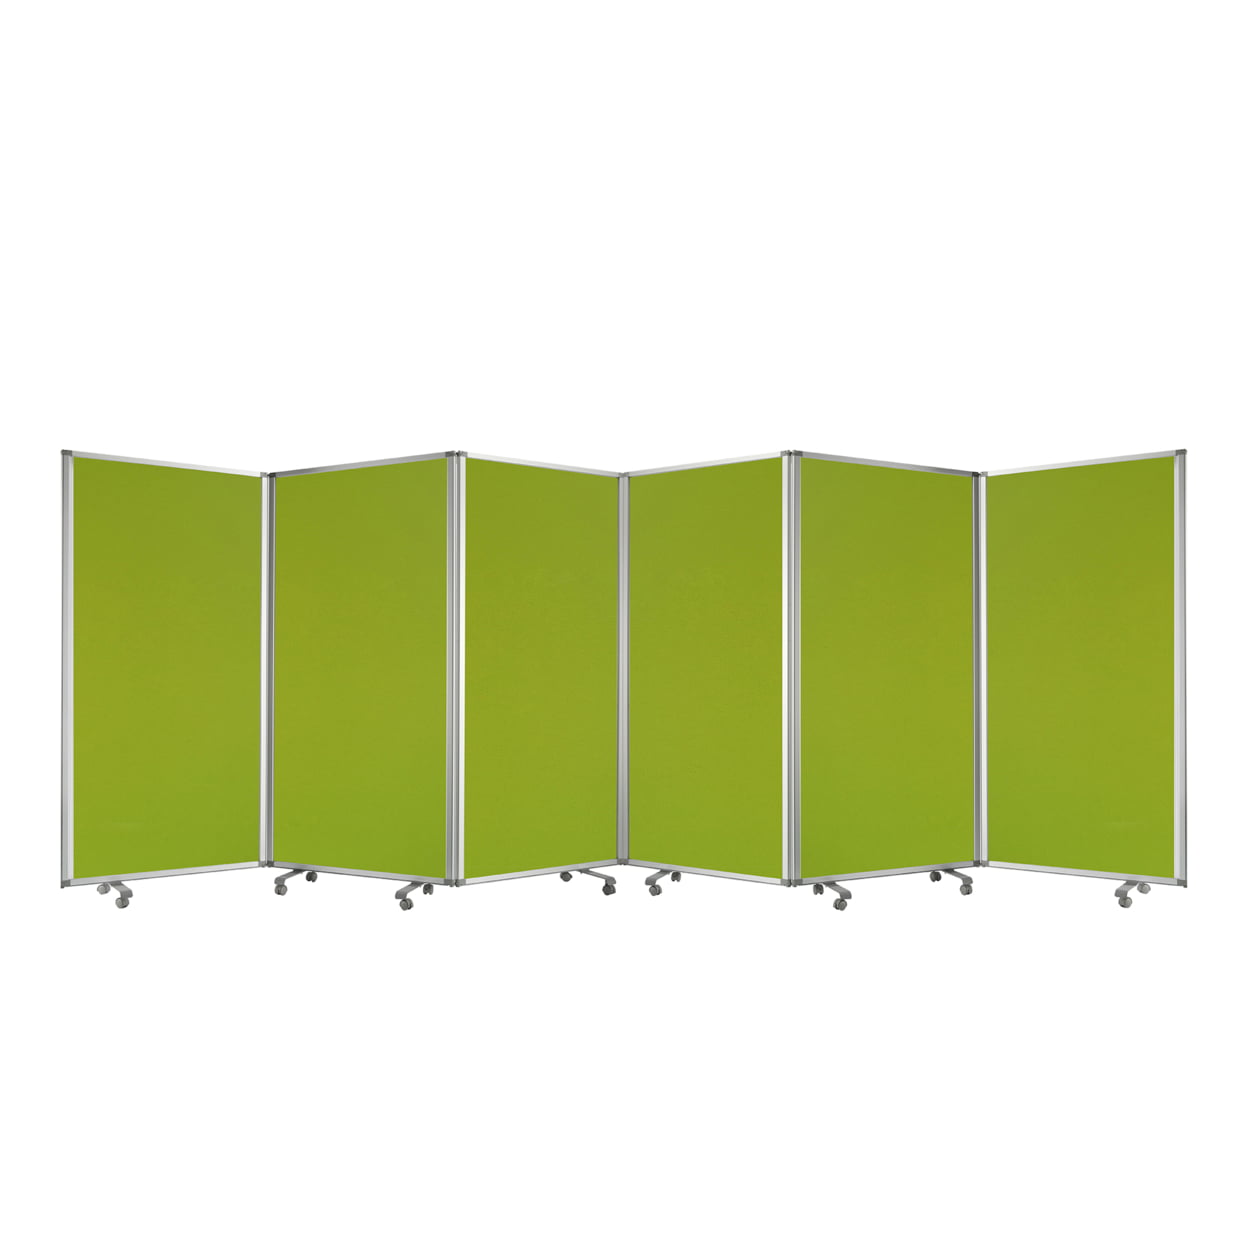 Bm220180 Accordion Style 6 Panel Fabric Upholstered Metal Screen With Casters, Green